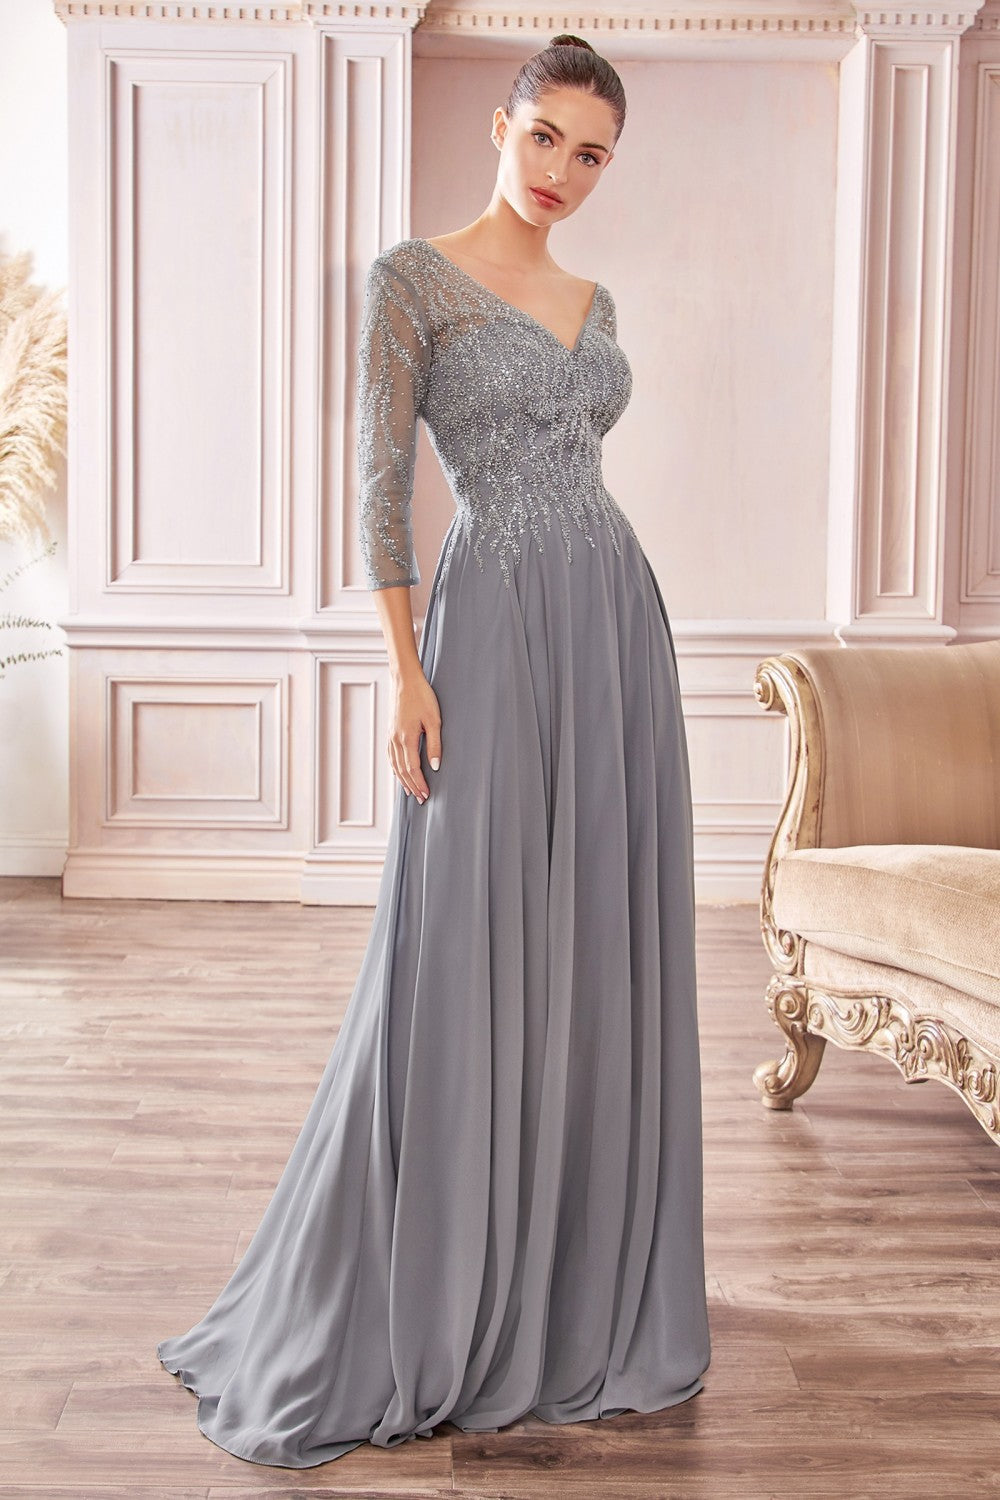 Flowy Chiffon A-line Prom & Ball Gown Luxury Mother Of Bride Style Three-quarter Sleeves and Trickle Embellished Bodice CDCD0171 Elsy Style Mother of the Bride Dress